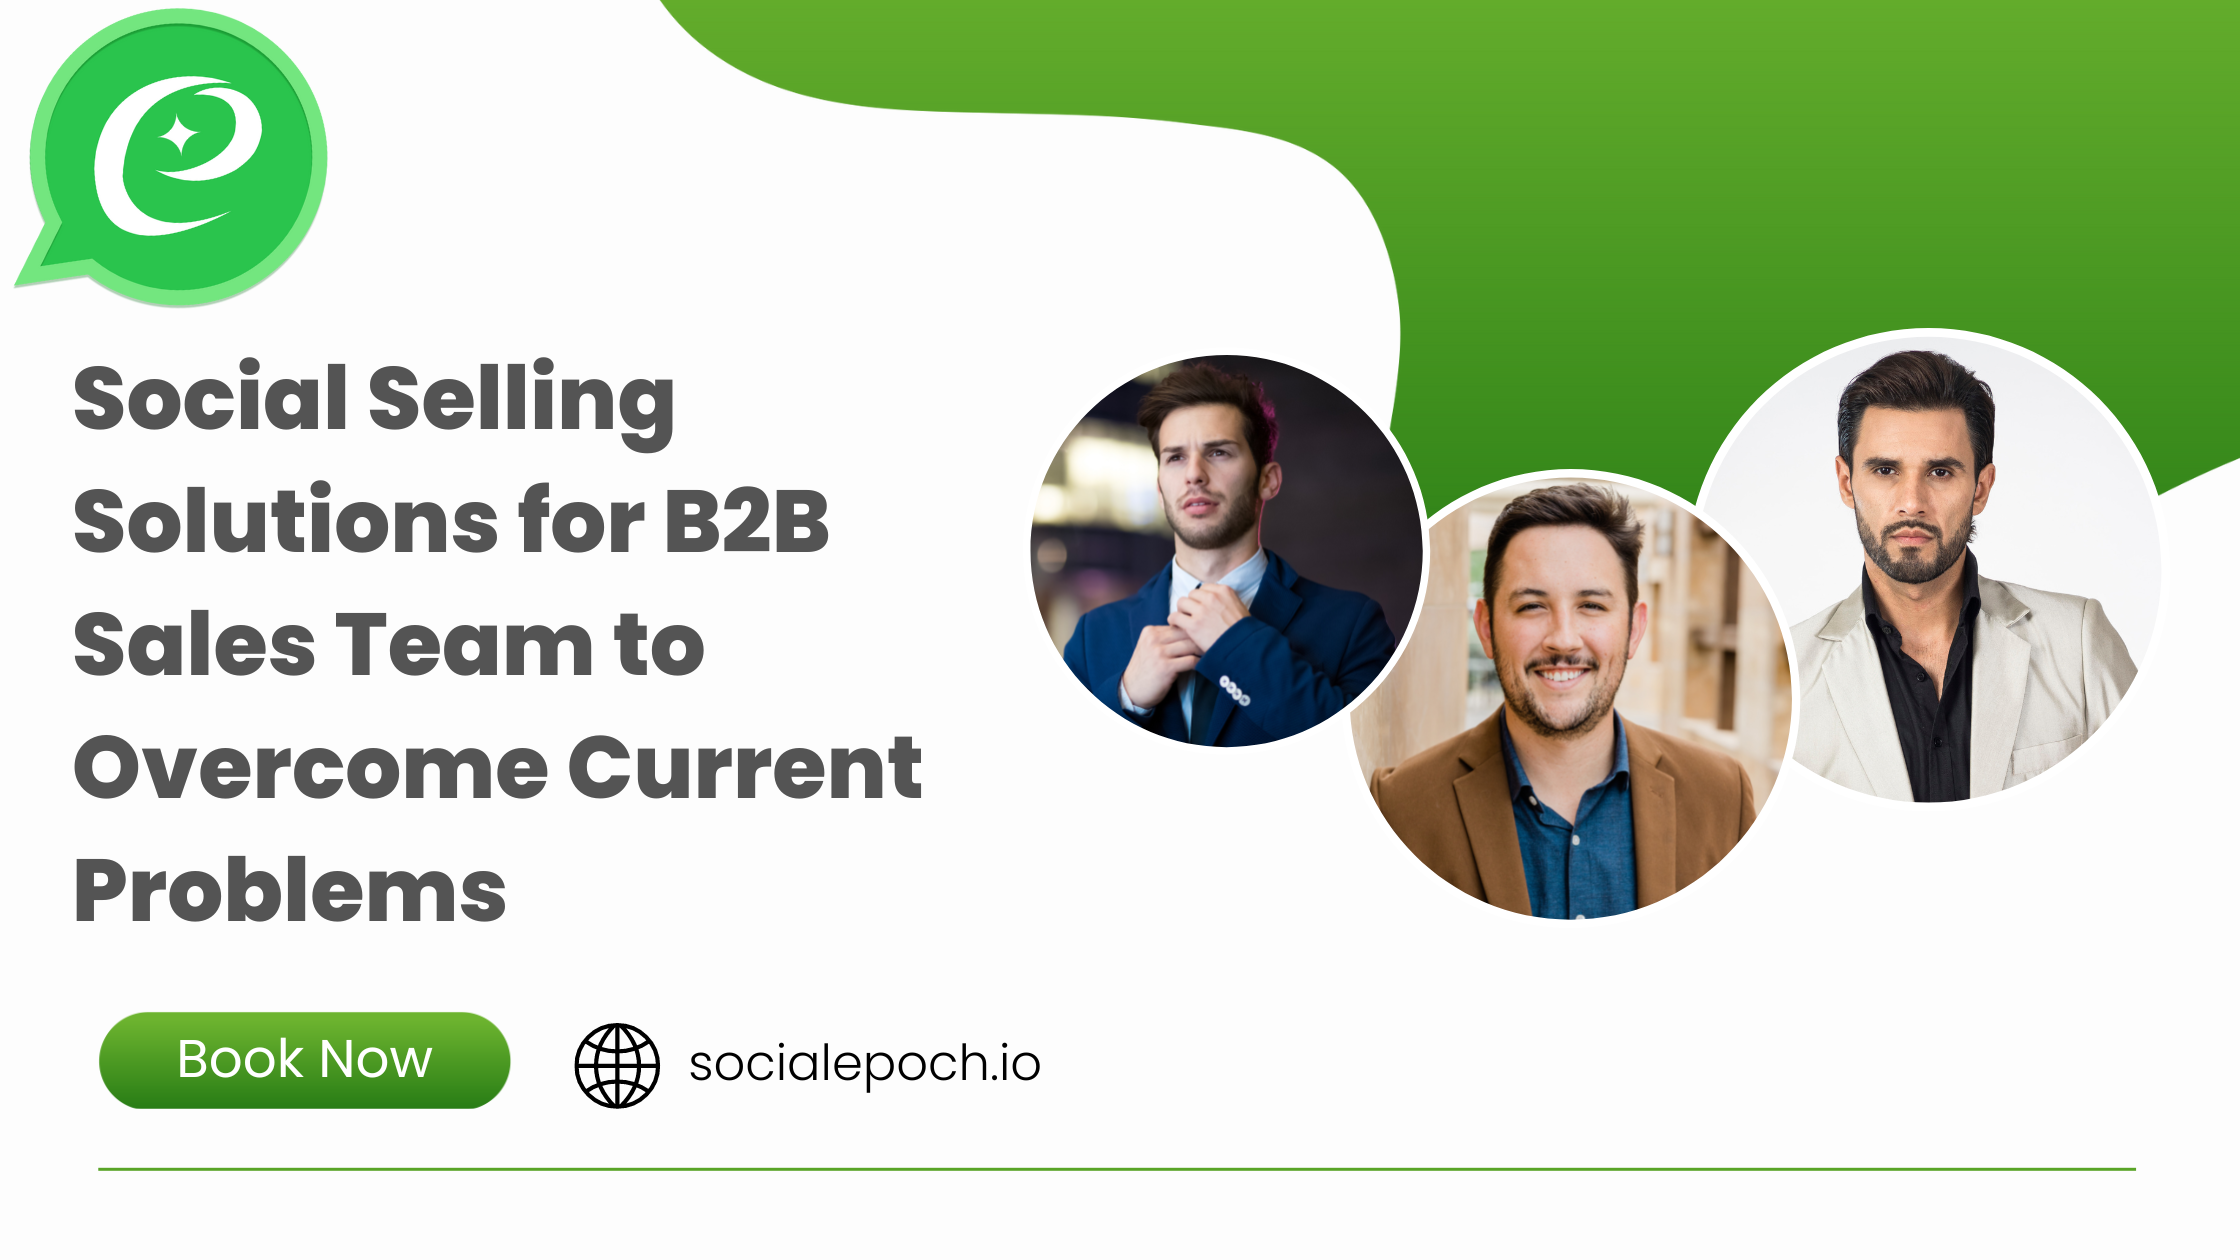 Social Selling Solutions for B2B Sales Team to Overcome Current Problems